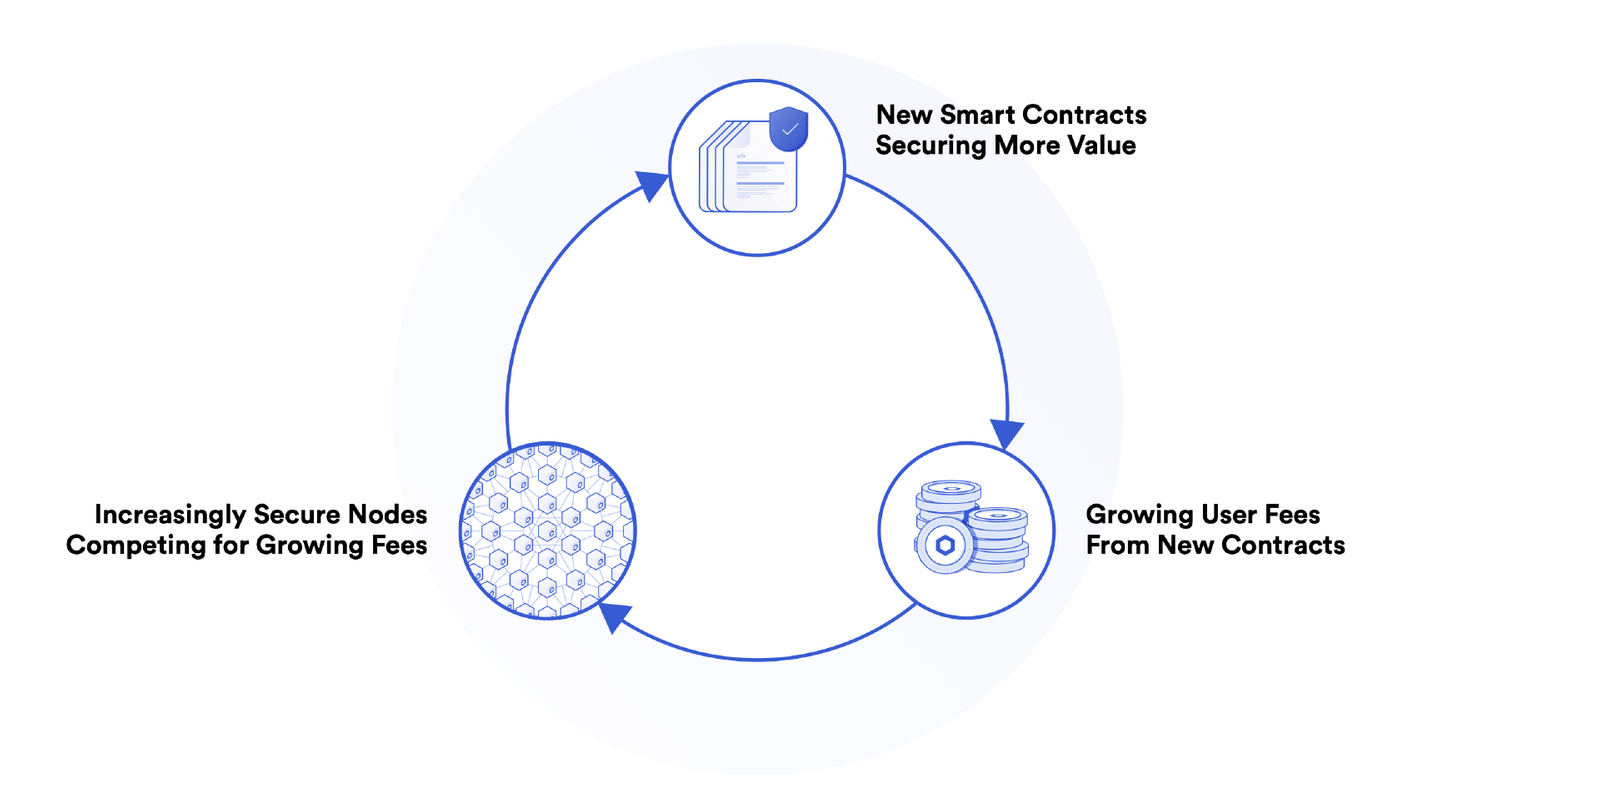 A diagram showing a positive feedback loop of smart contracts securing more value and becoming more secure.